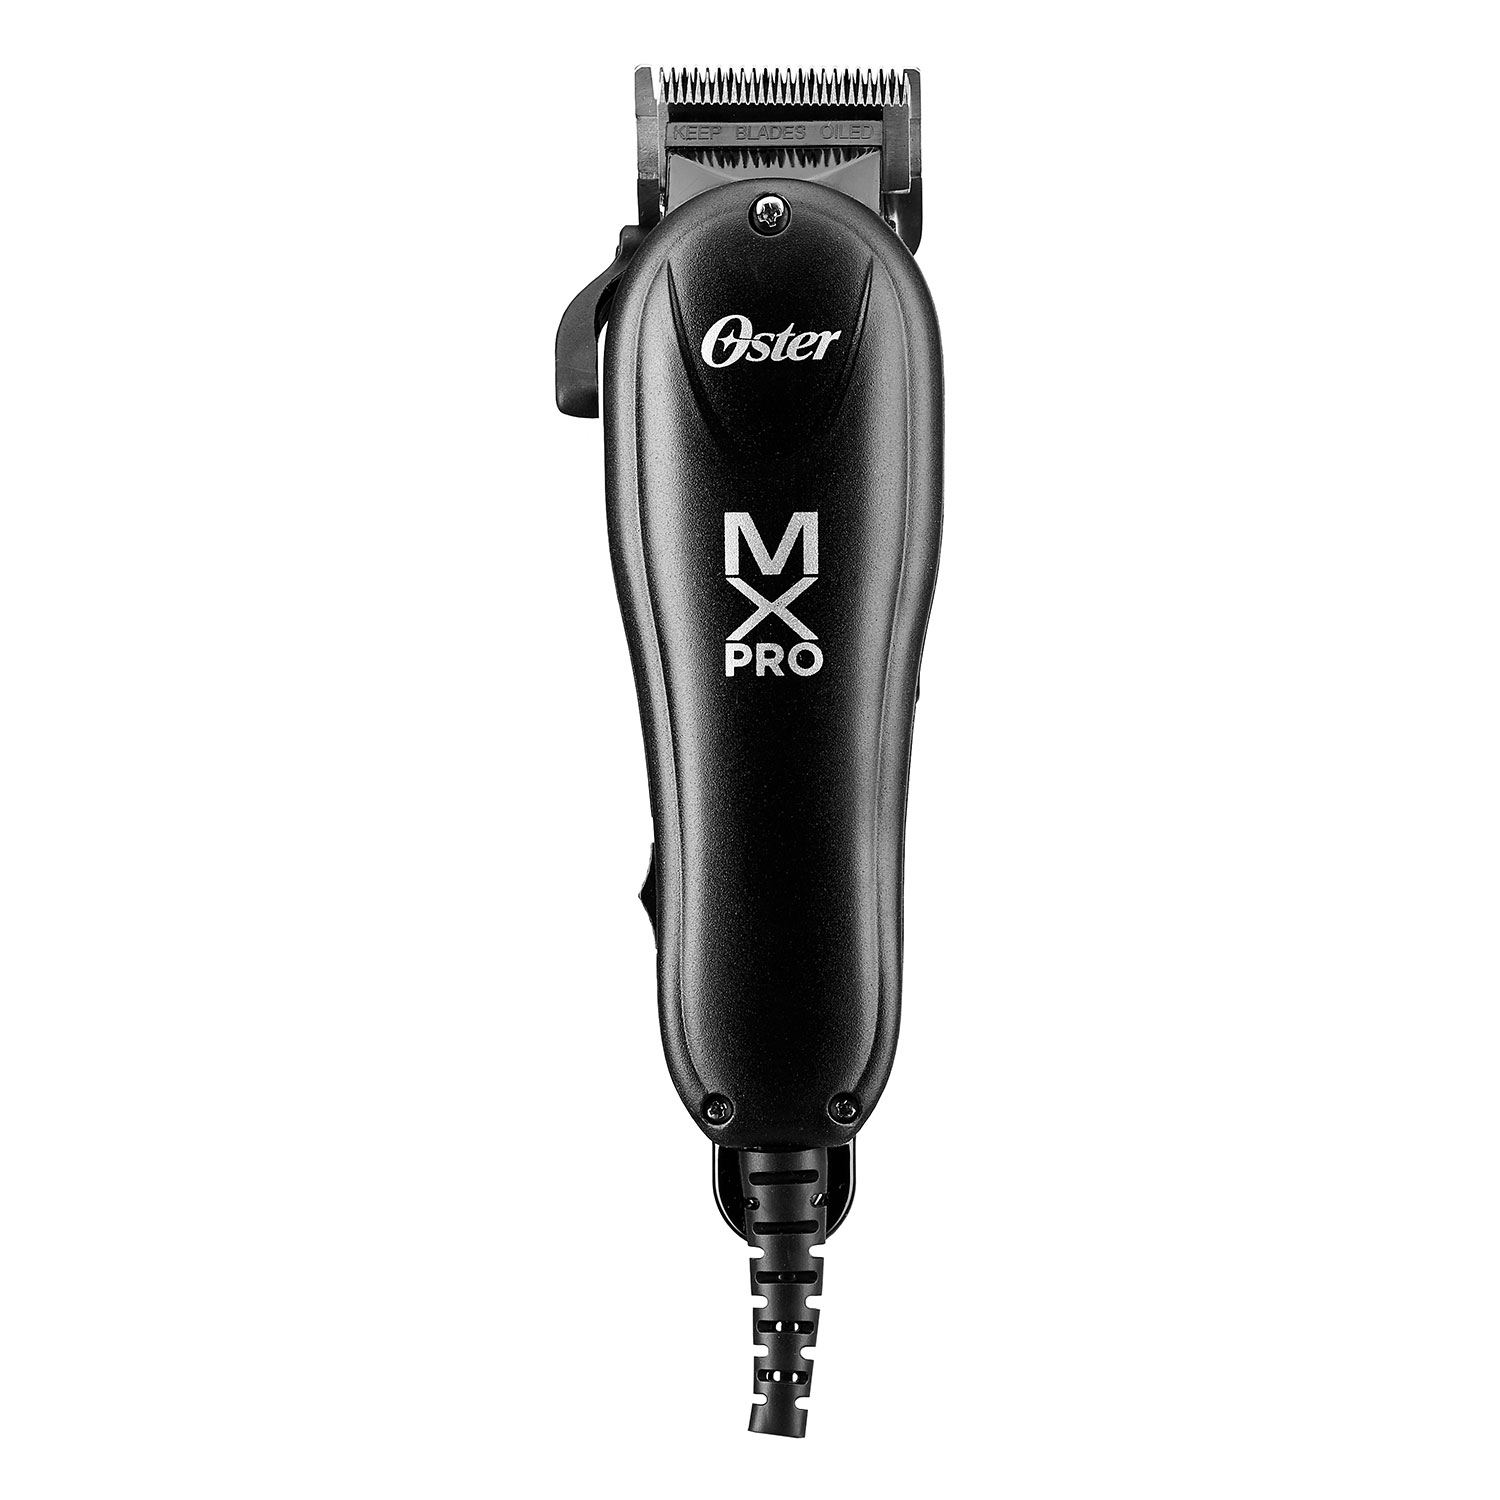 Product image from Oster - Haarschneide-Maschine mXpro